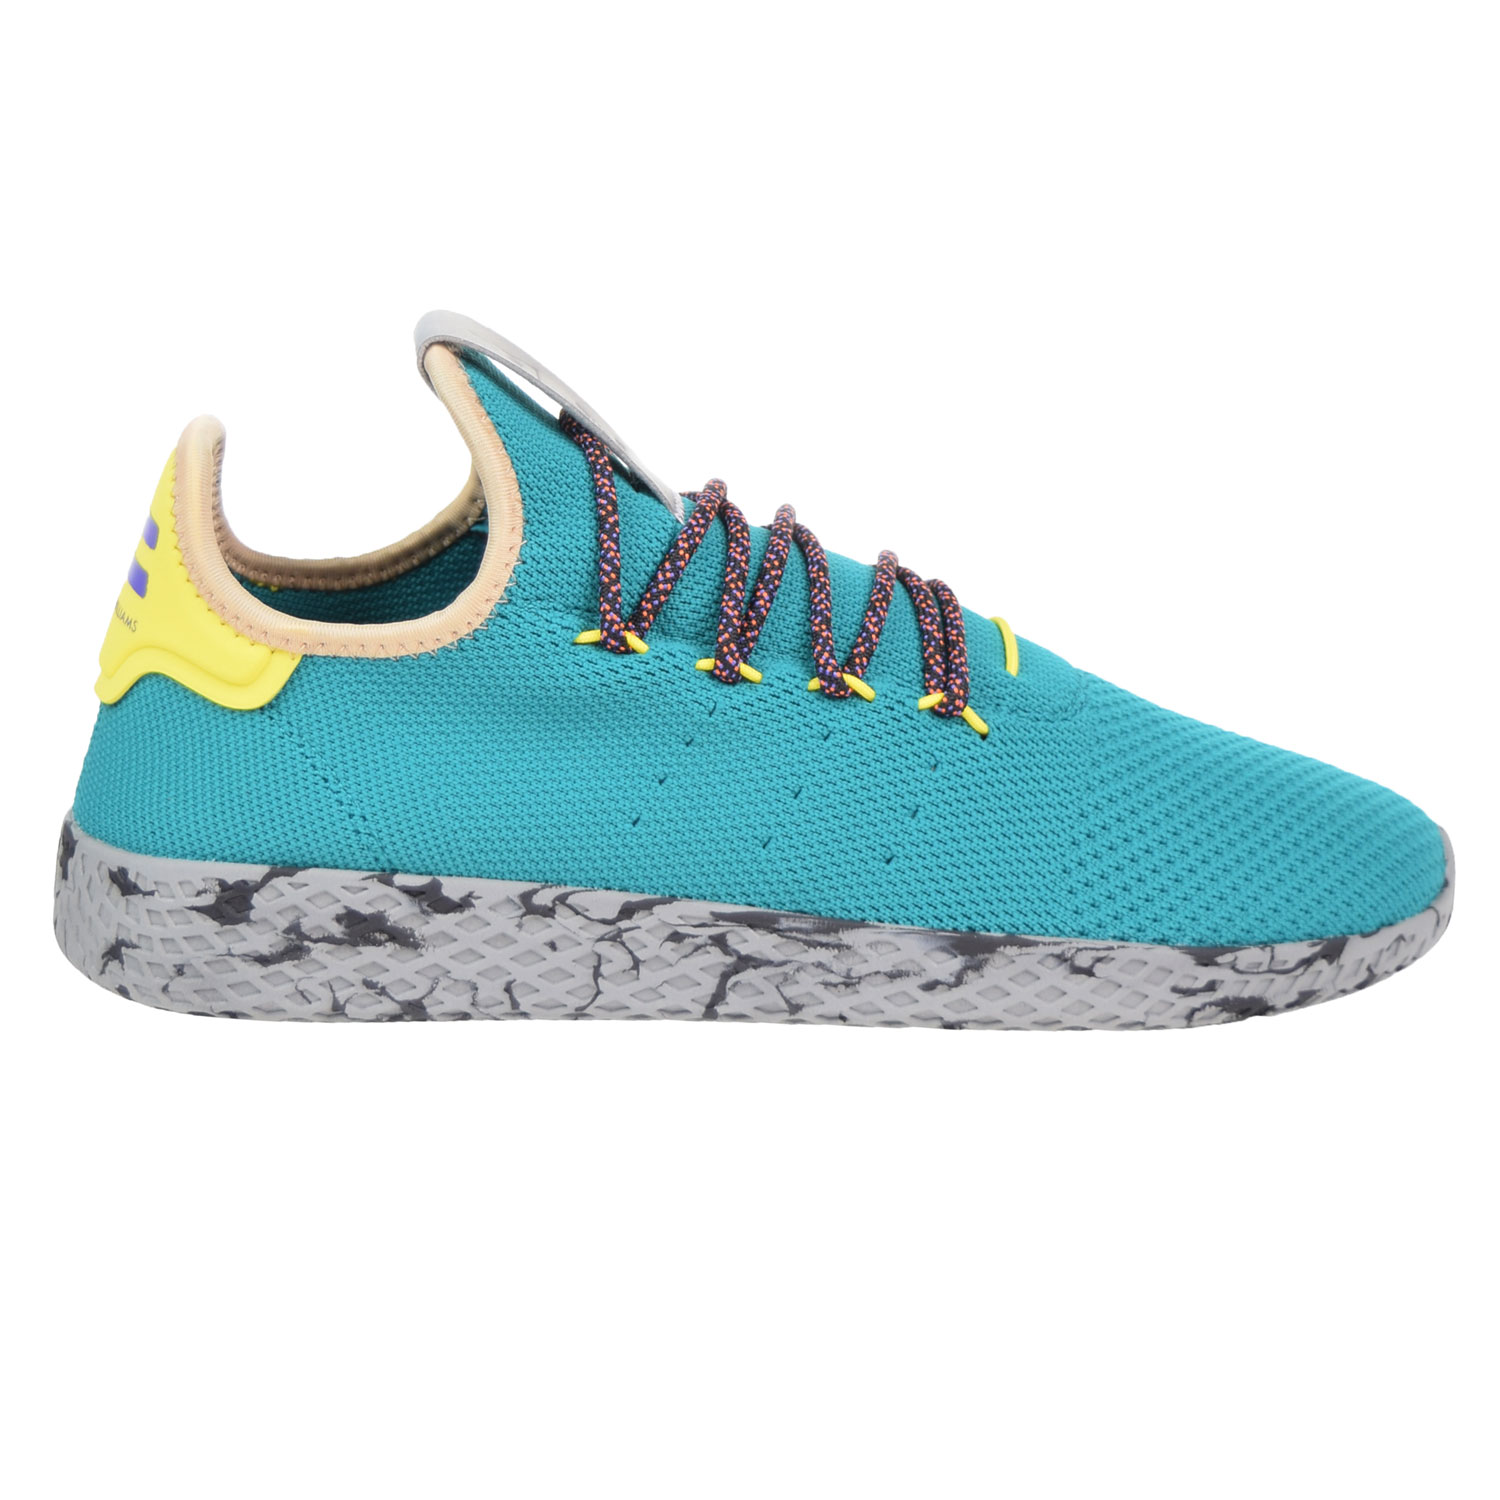 Shoes Teal-Yellow-Grey Marble cq1872 